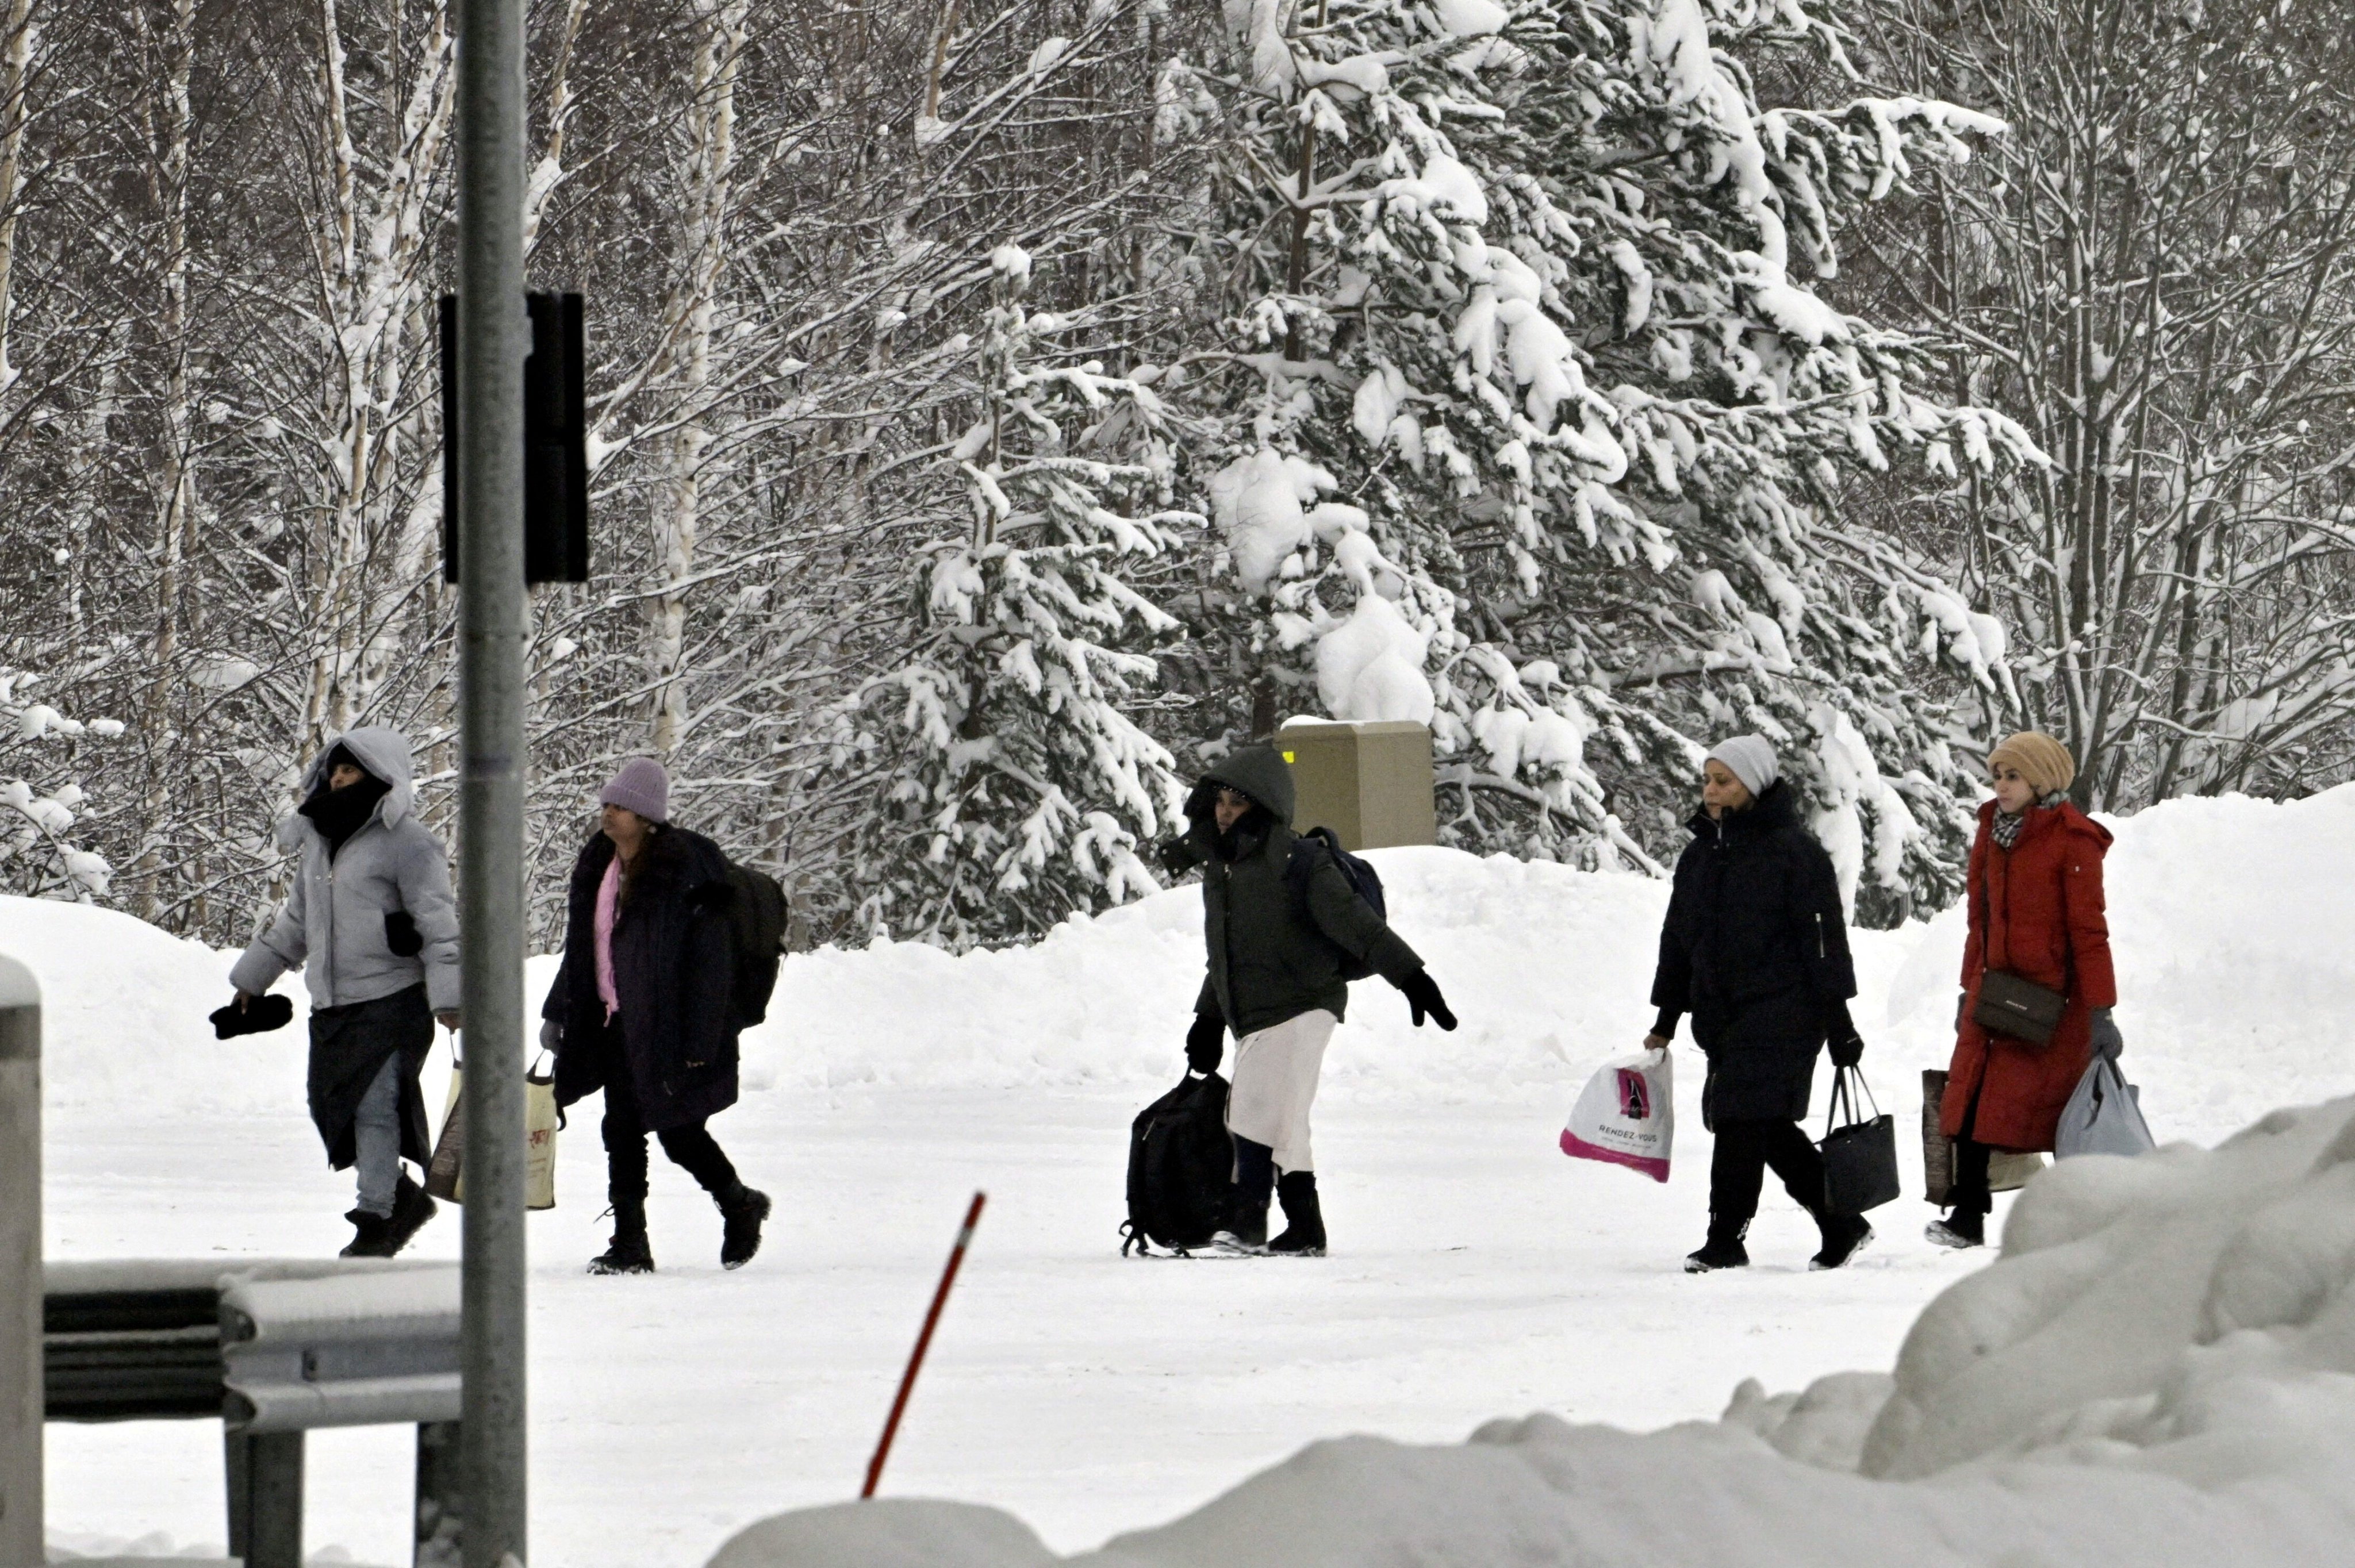 Migrants arrive at the Vaalimaa border check point between Finland and Russia. Finland closed the border in mid-December after nearly 1,000 migrants arrived without a visa through its border crossings with Russia since August. Photo: Reuters